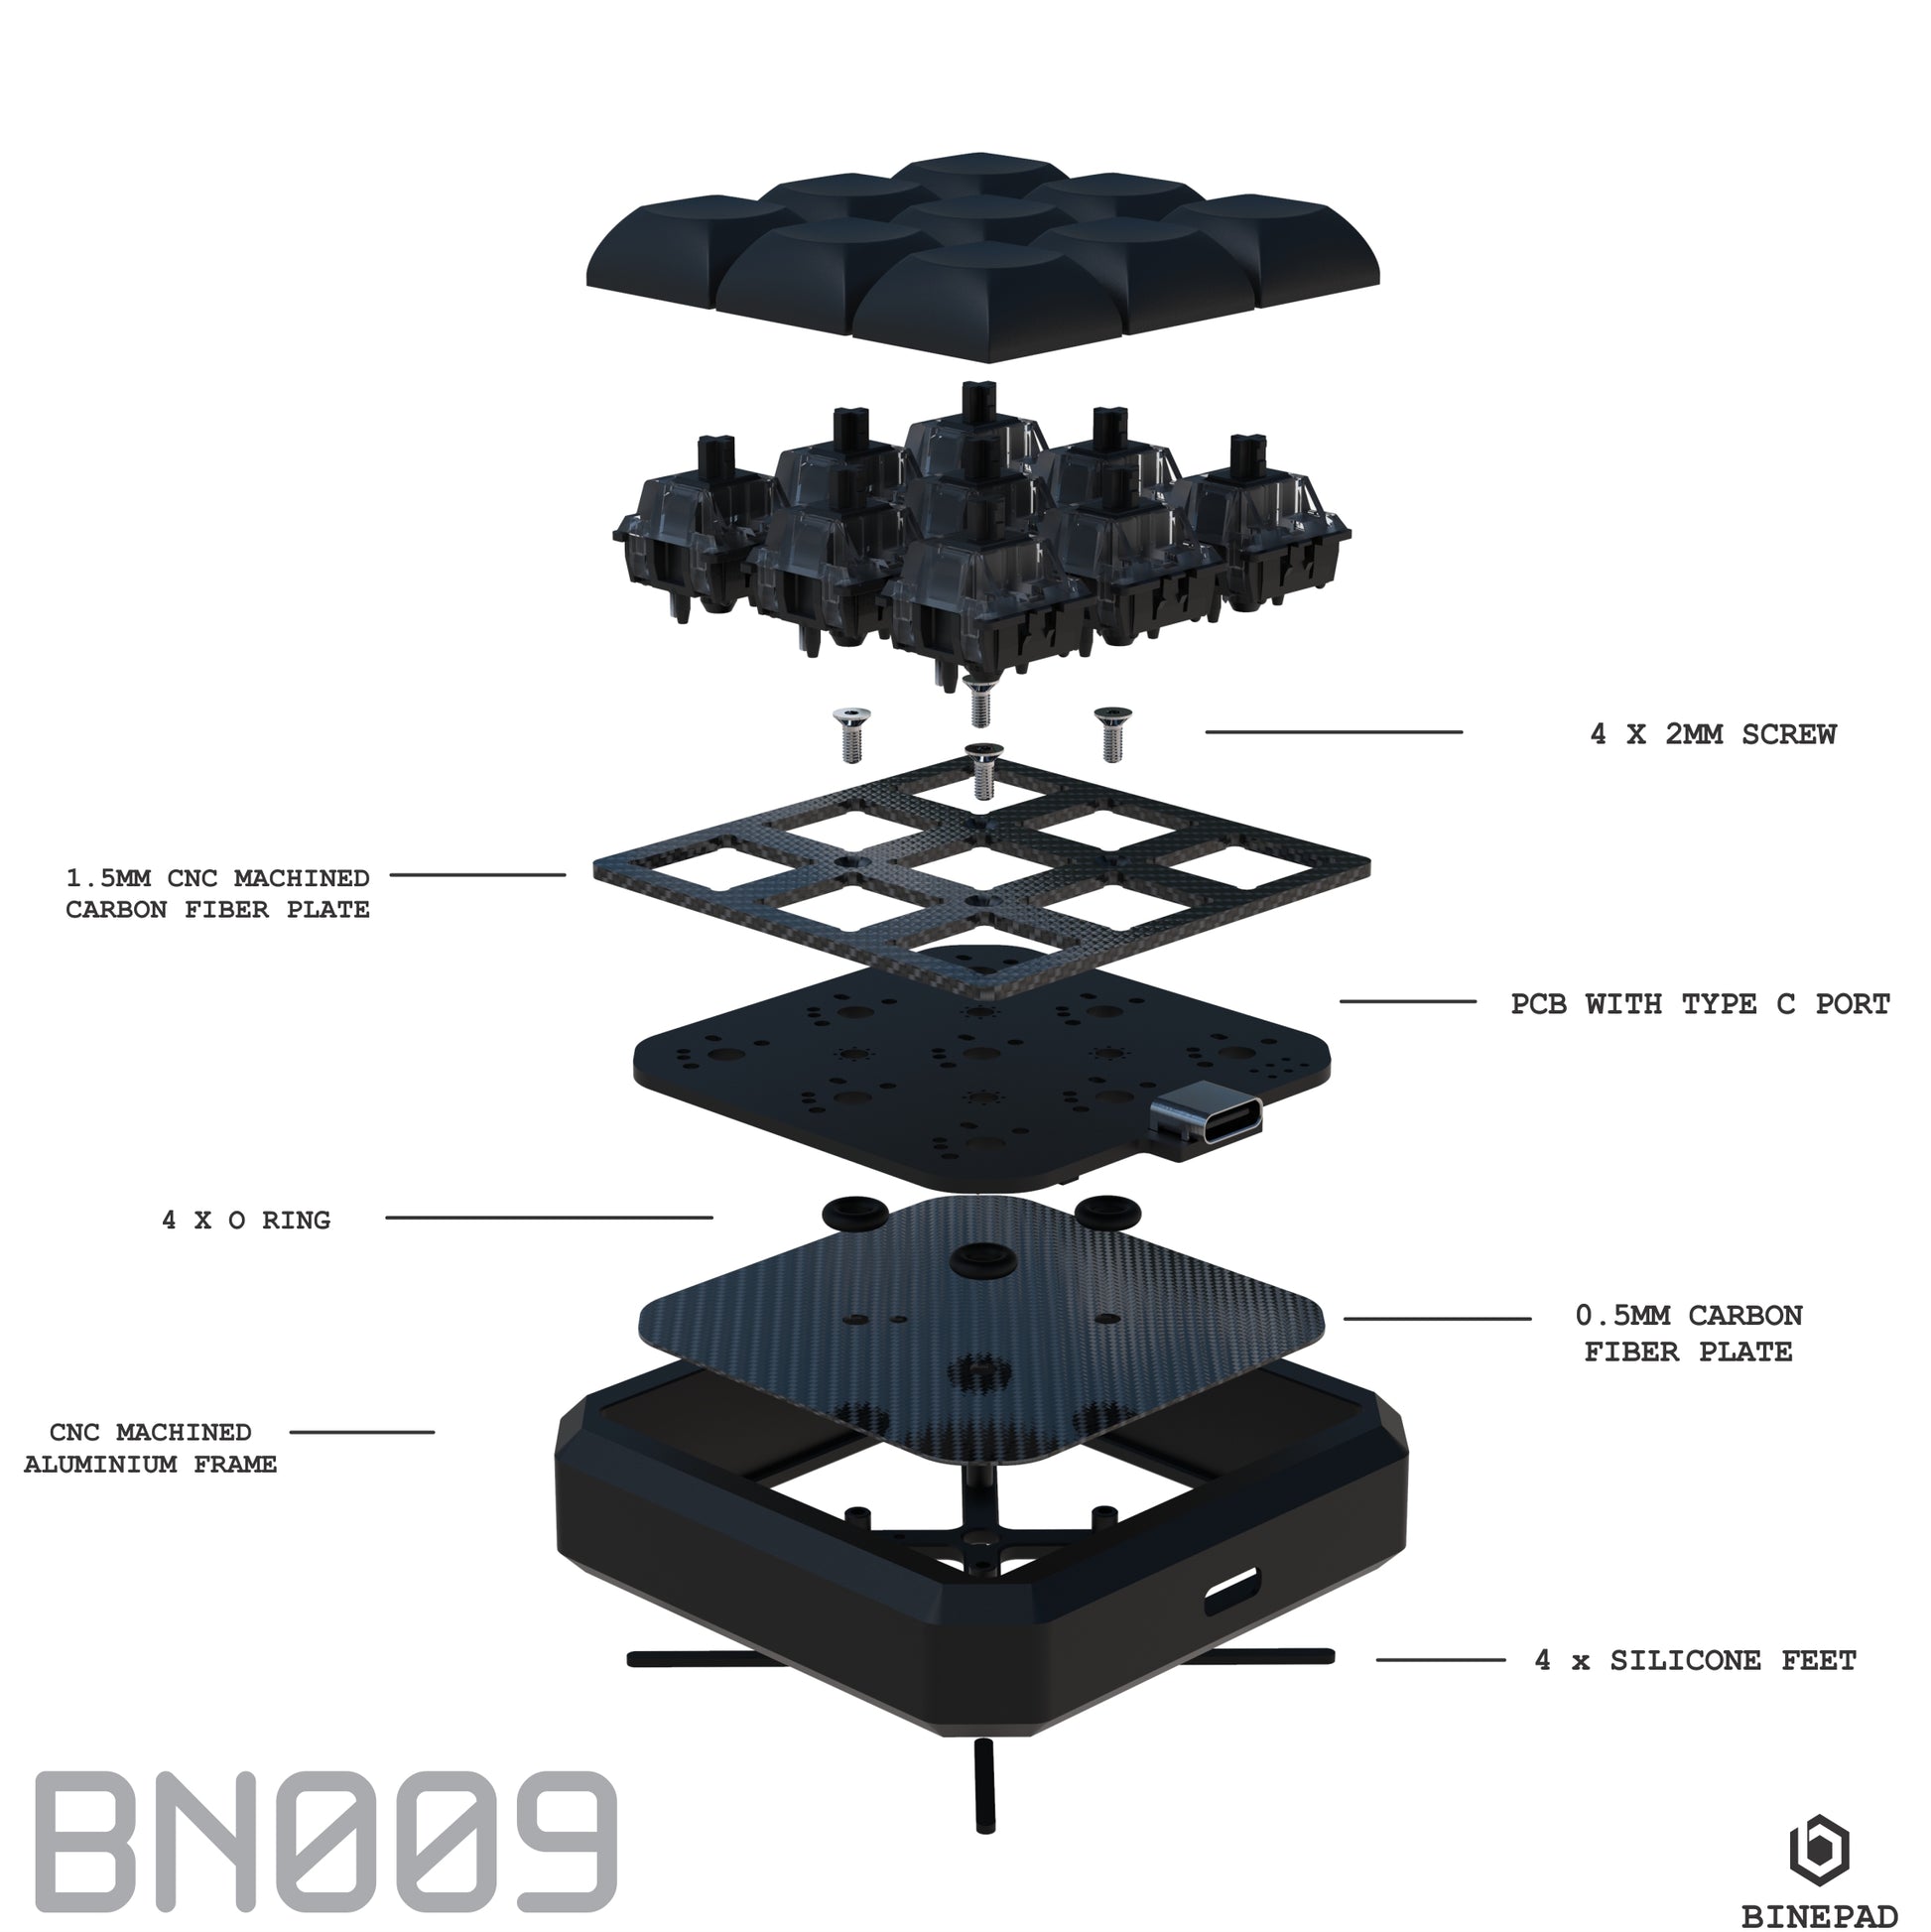 Graphic design of the layered internal layout and components of the BN009 Macropad